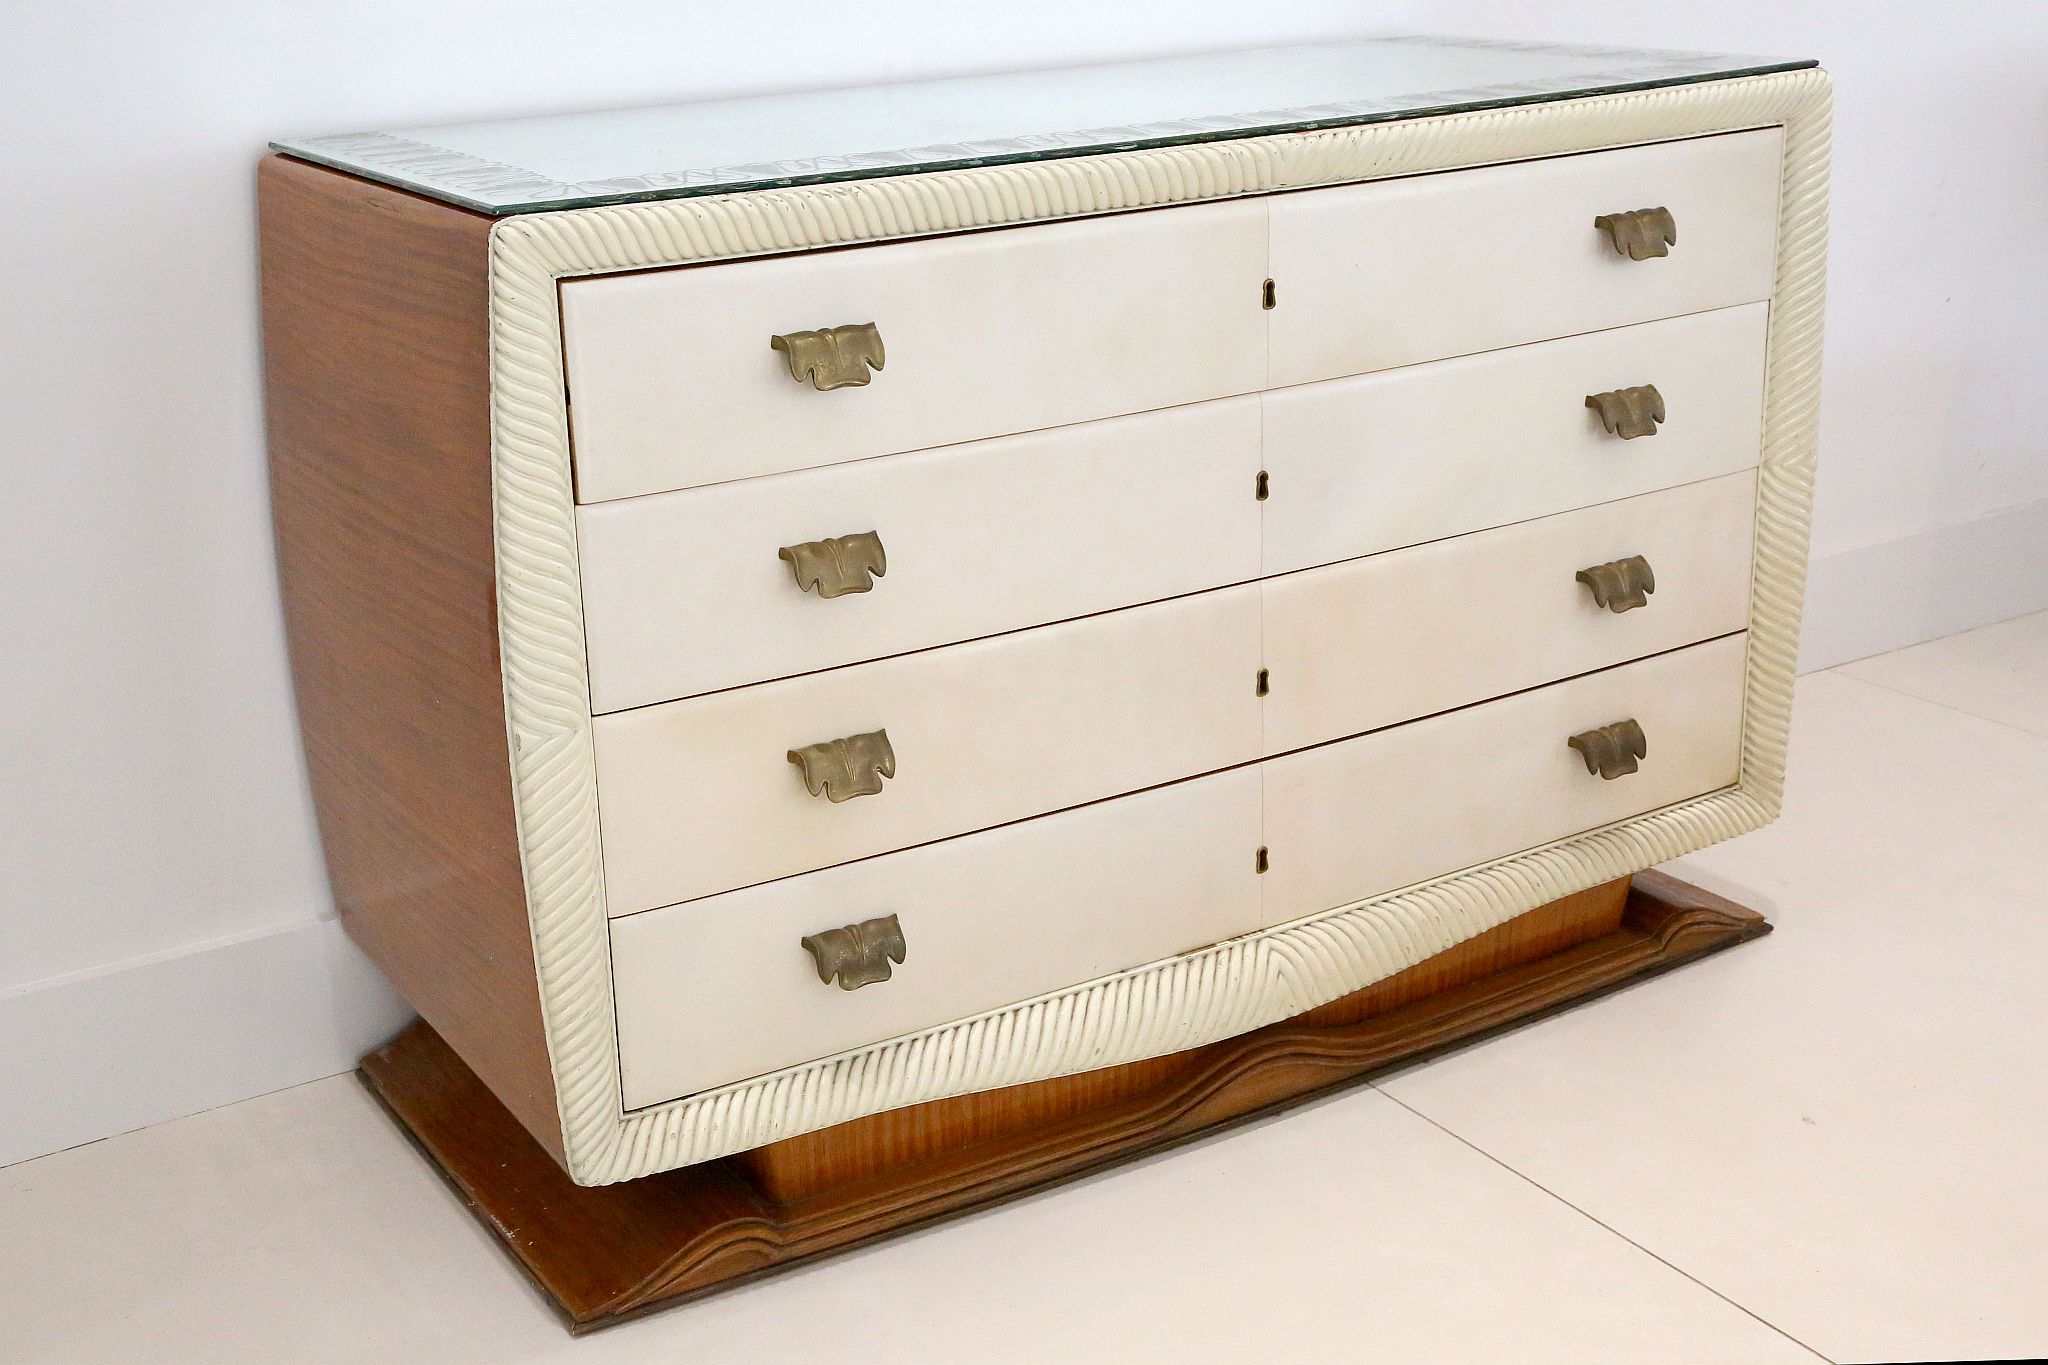 A 1950s ITALIAN PARCHMENT FRONT CHEST OF DRAWERS, with mirrored top, four drawers with lacquered